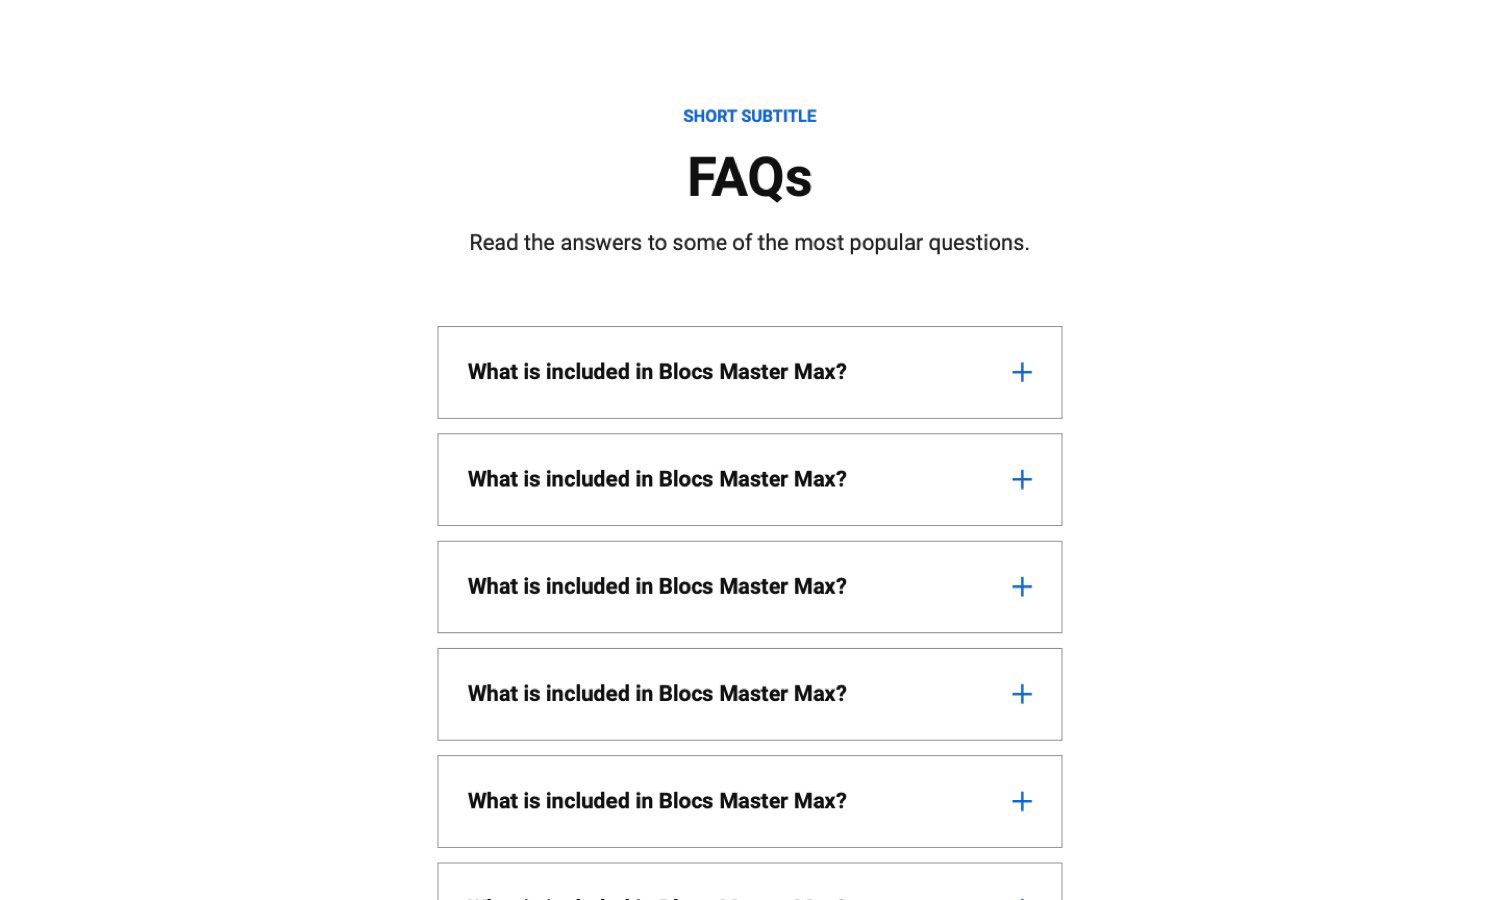 faq frequently asked questions section design